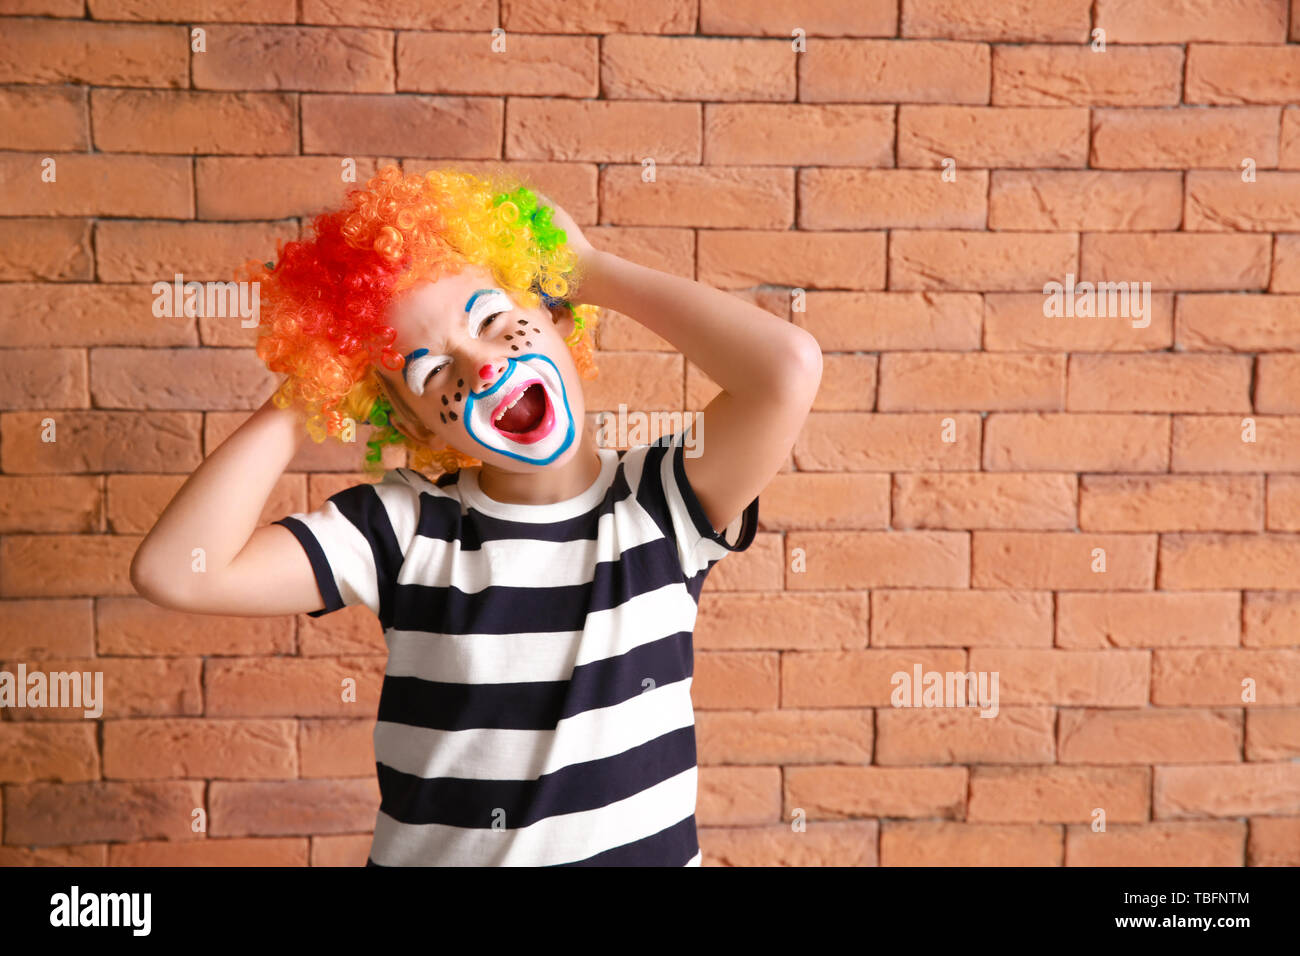 Cute little boy with clown makeup against brick wall. April fools' day  celebration Stock Photo - Alamy